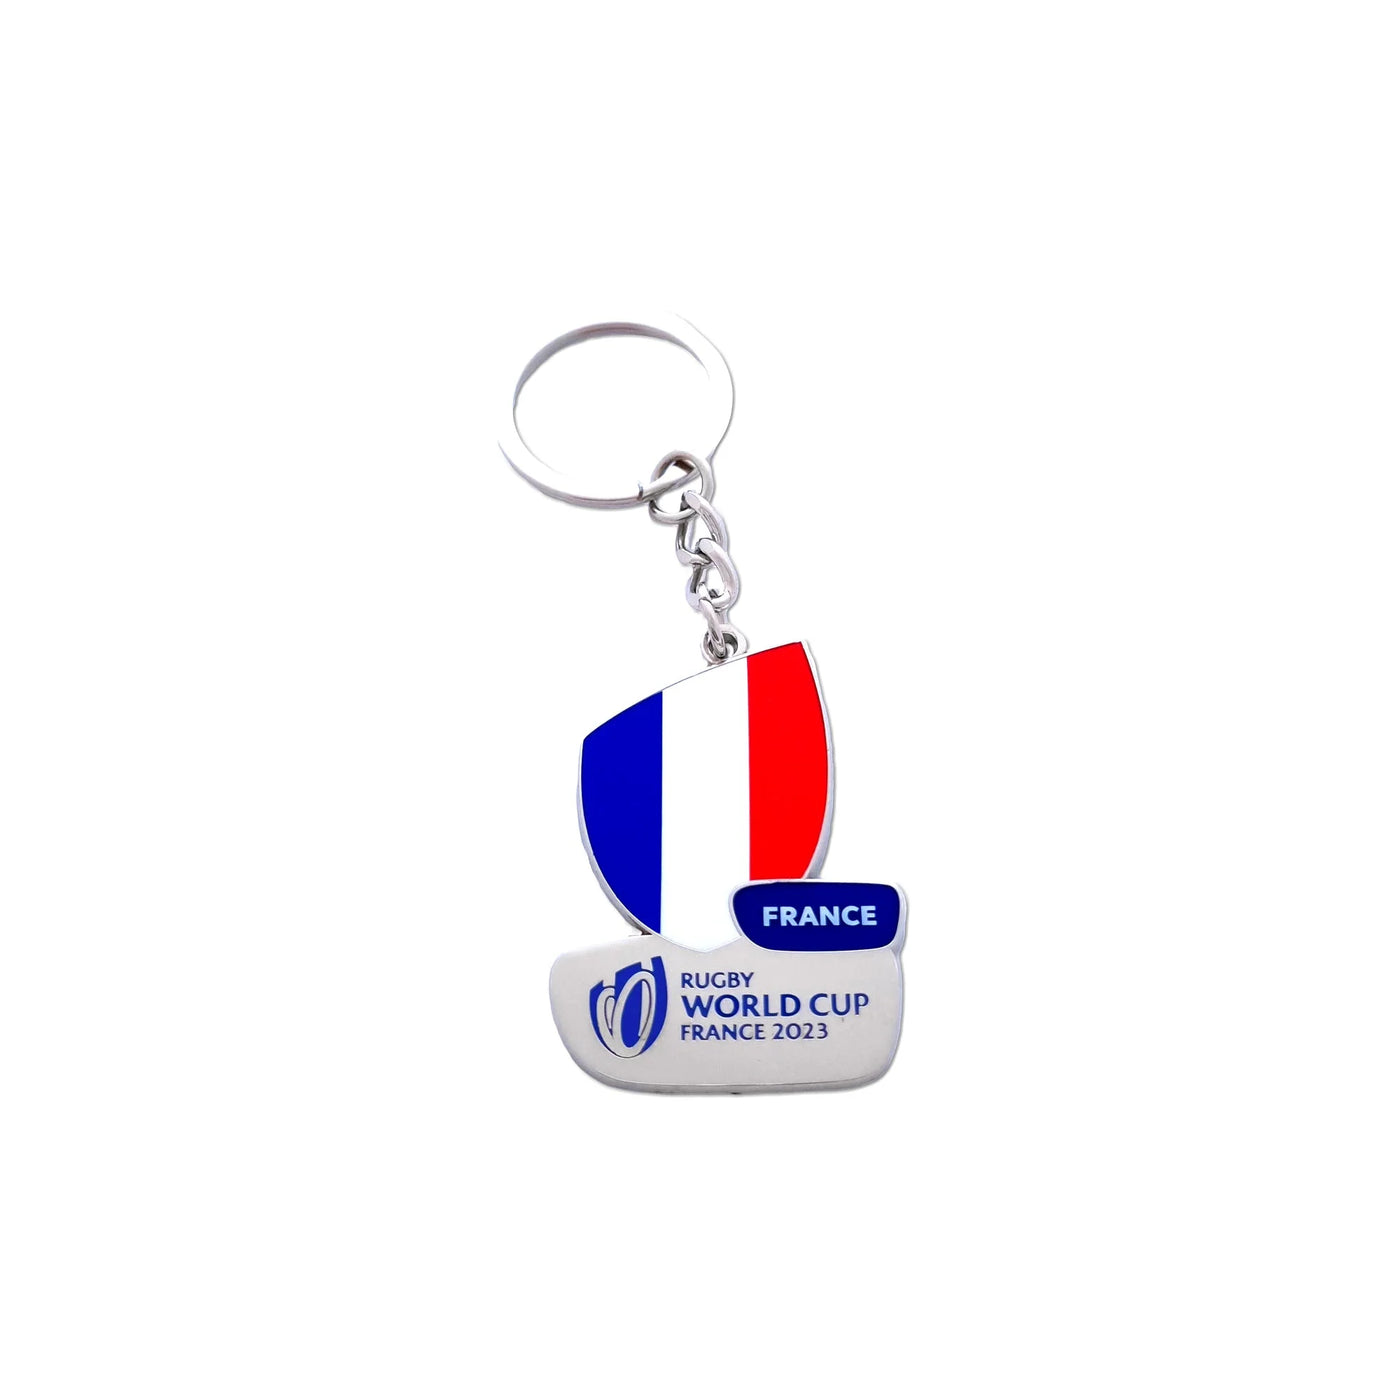 Rugby World Cup 2023 France Keychain